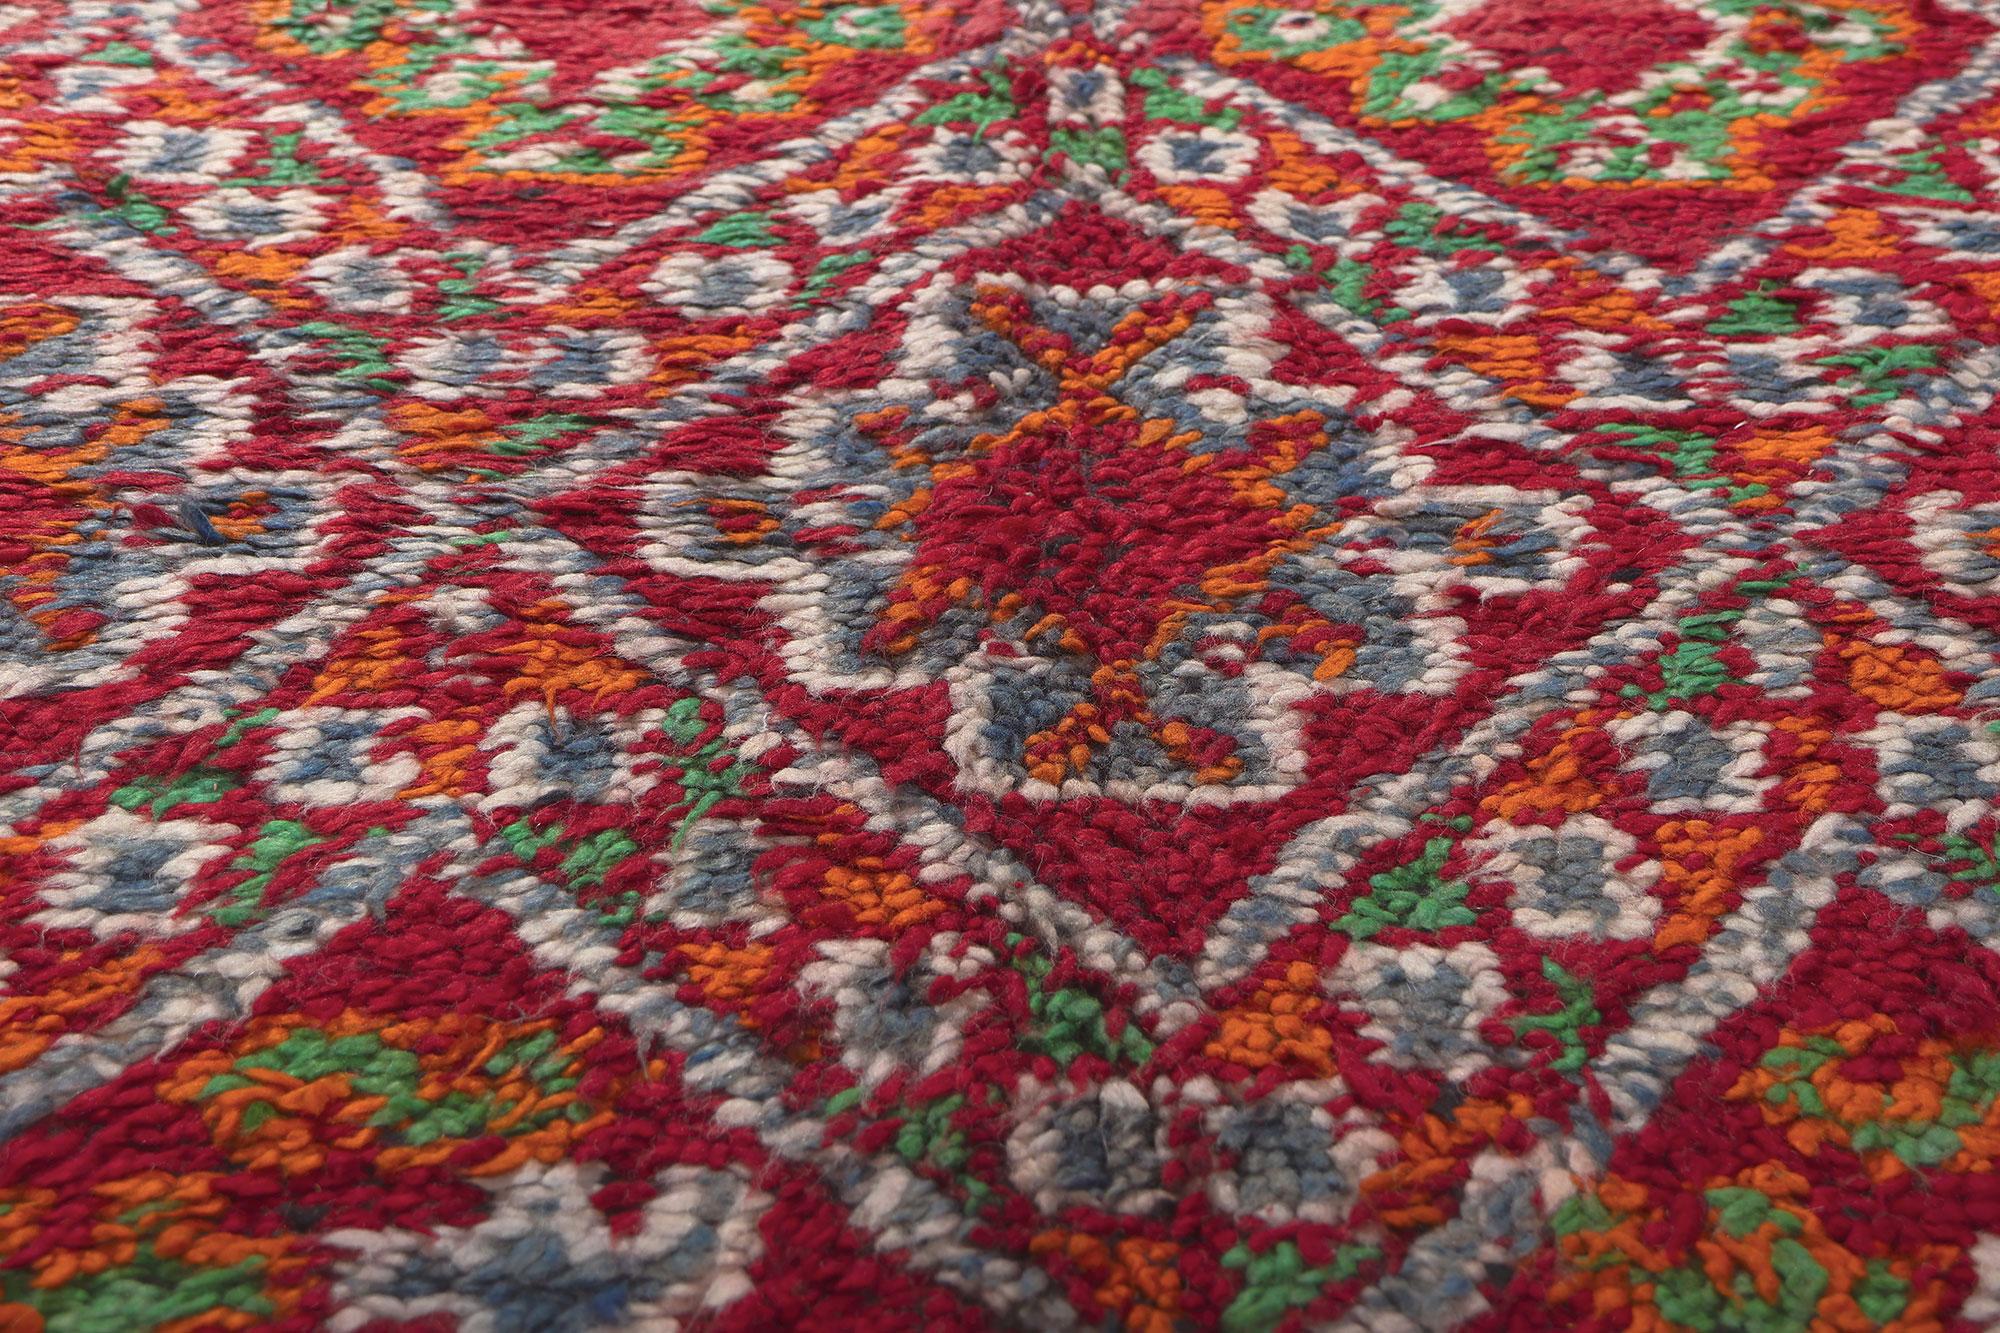 Vintage Red Beni MGuild Moroccan Rug, Midcentury Modern Meets Tribal Enchantment In Good Condition For Sale In Dallas, TX